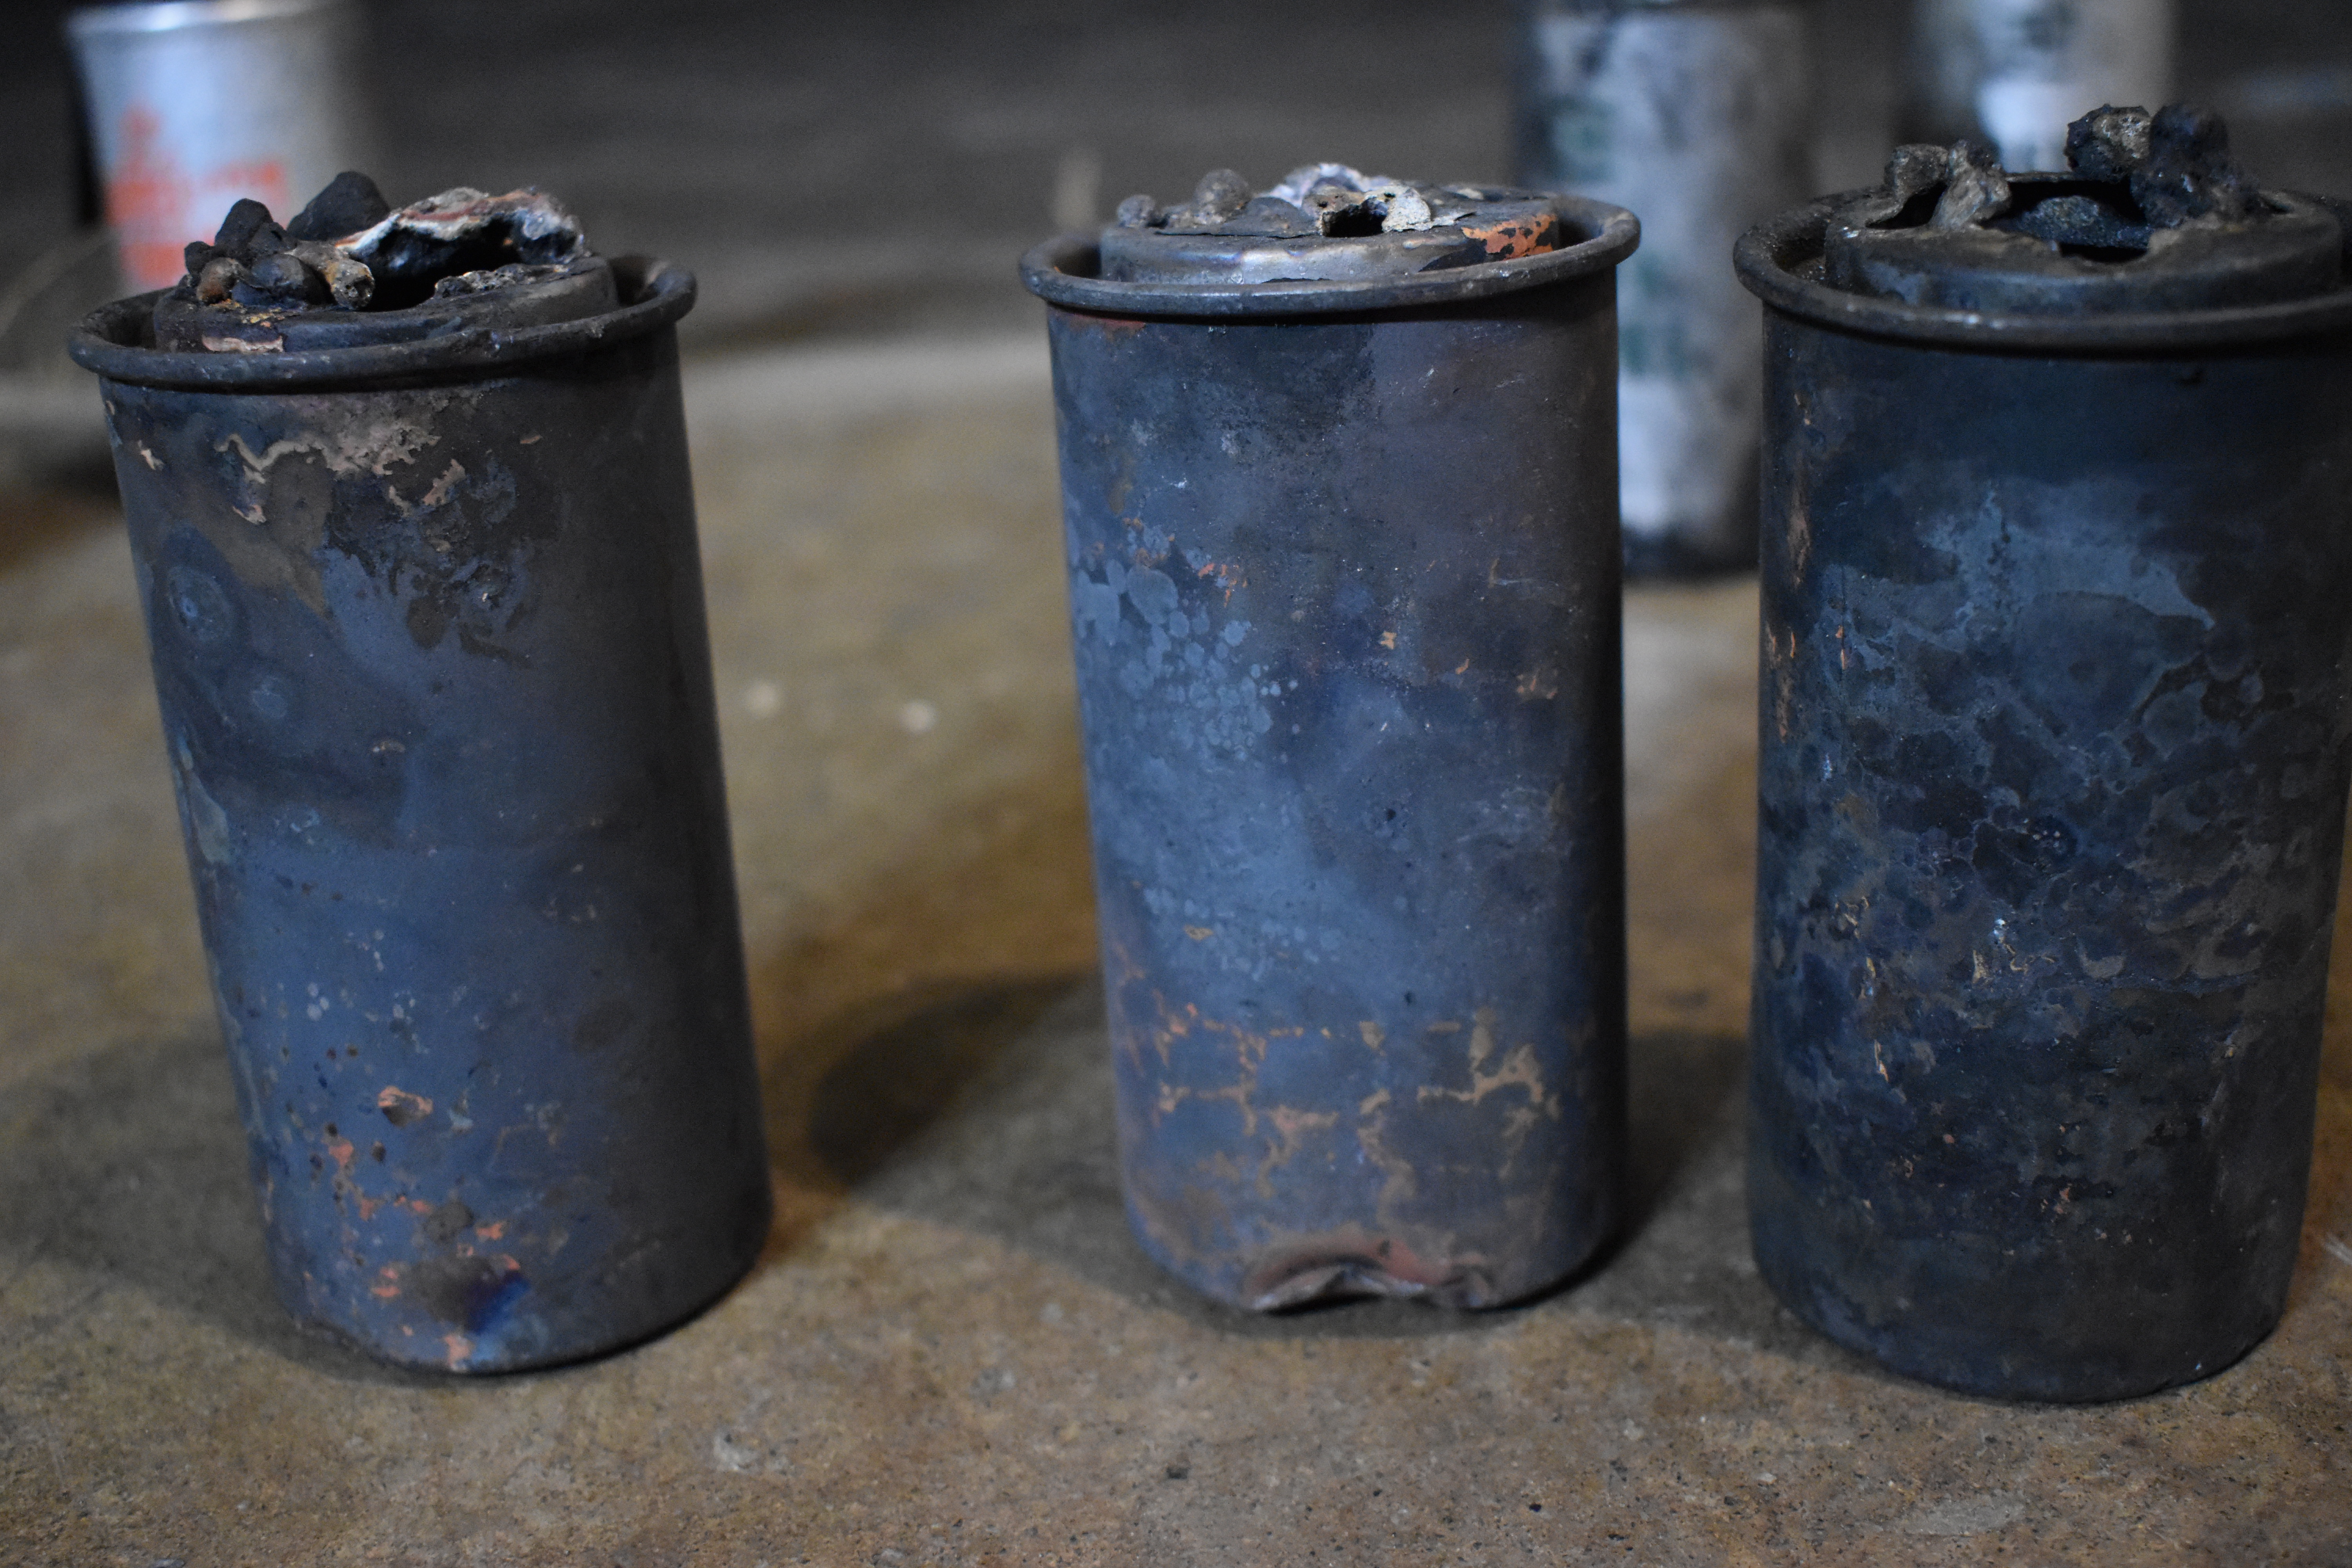 Three canisters of HC stand in the foreground of the image, the background yields three other canisters of various chemical agents. The HC canisters are cylindrical with riveted tops resembling a paint can lid. Their markings have burned away with the heat of their ignition. Metal along the top has melted, peeled and been blown outwards. Their rough rounded edges border holes into the center of the canister. Chemical reactions have changed the color of the metal to dark grey, rust brown, and a navy blue. The canisters are dented from impact and appear to have lost any smoothness they may have once possessed.